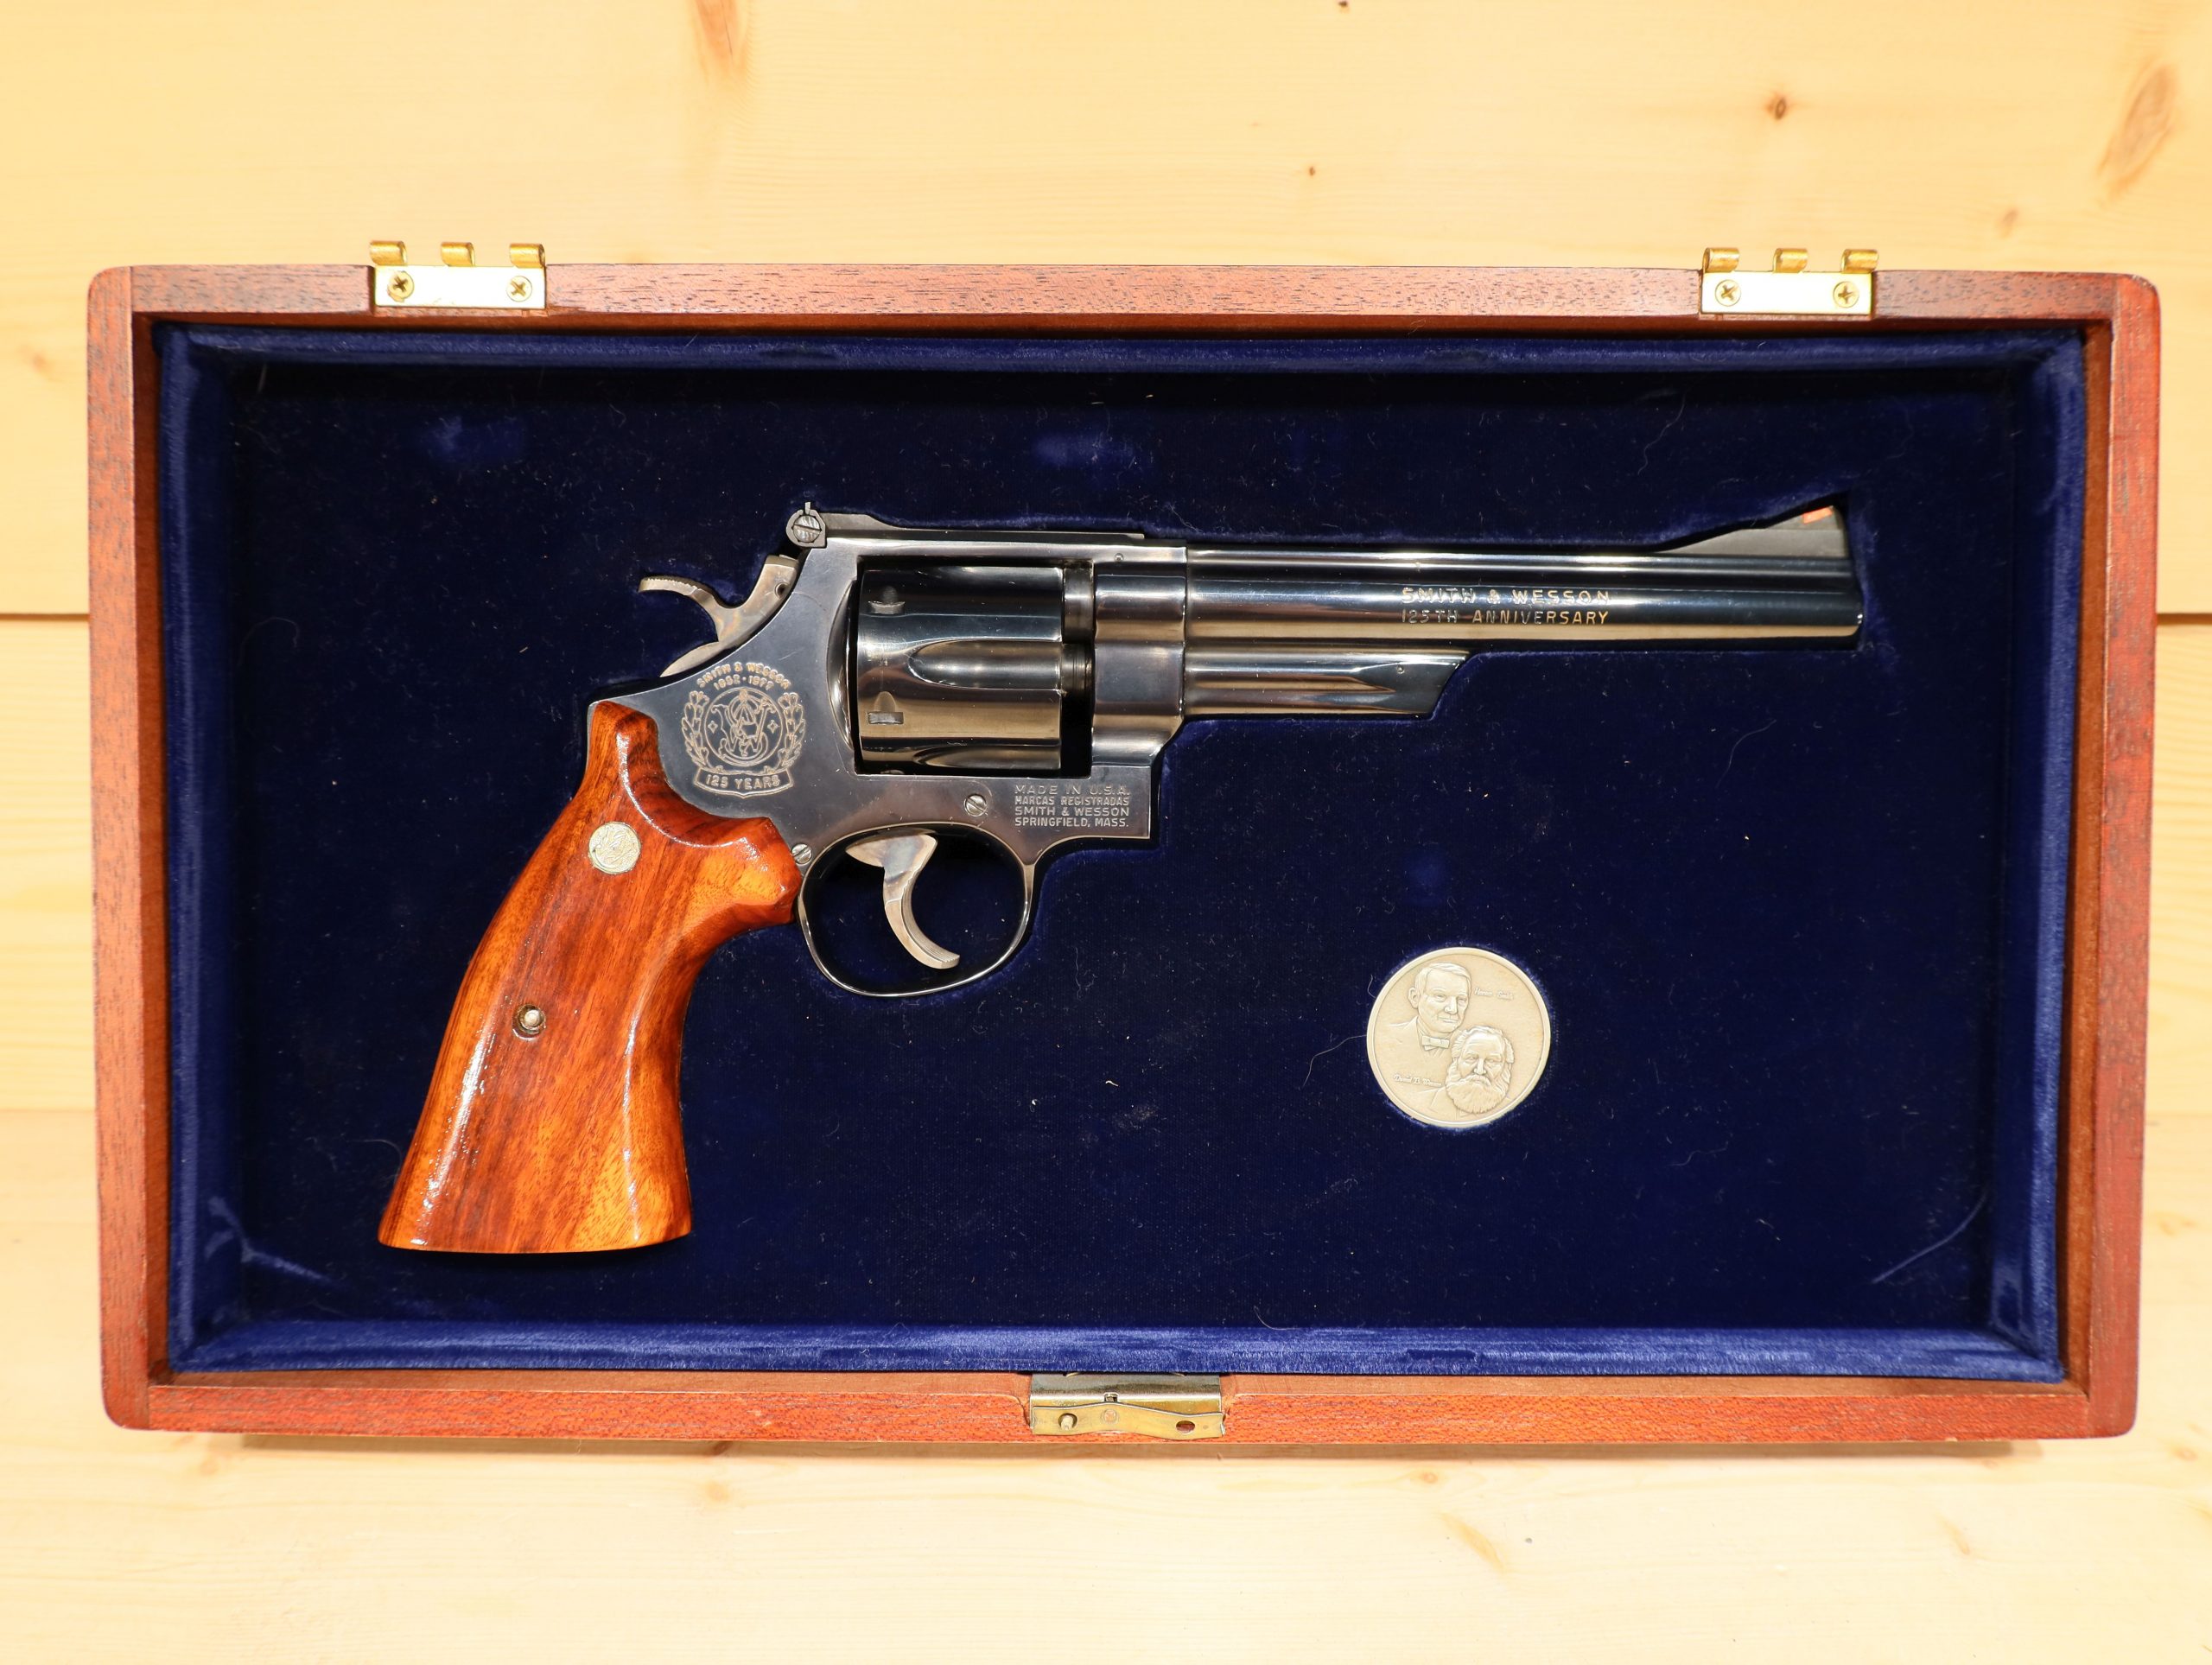 smith and wesson revolver 45